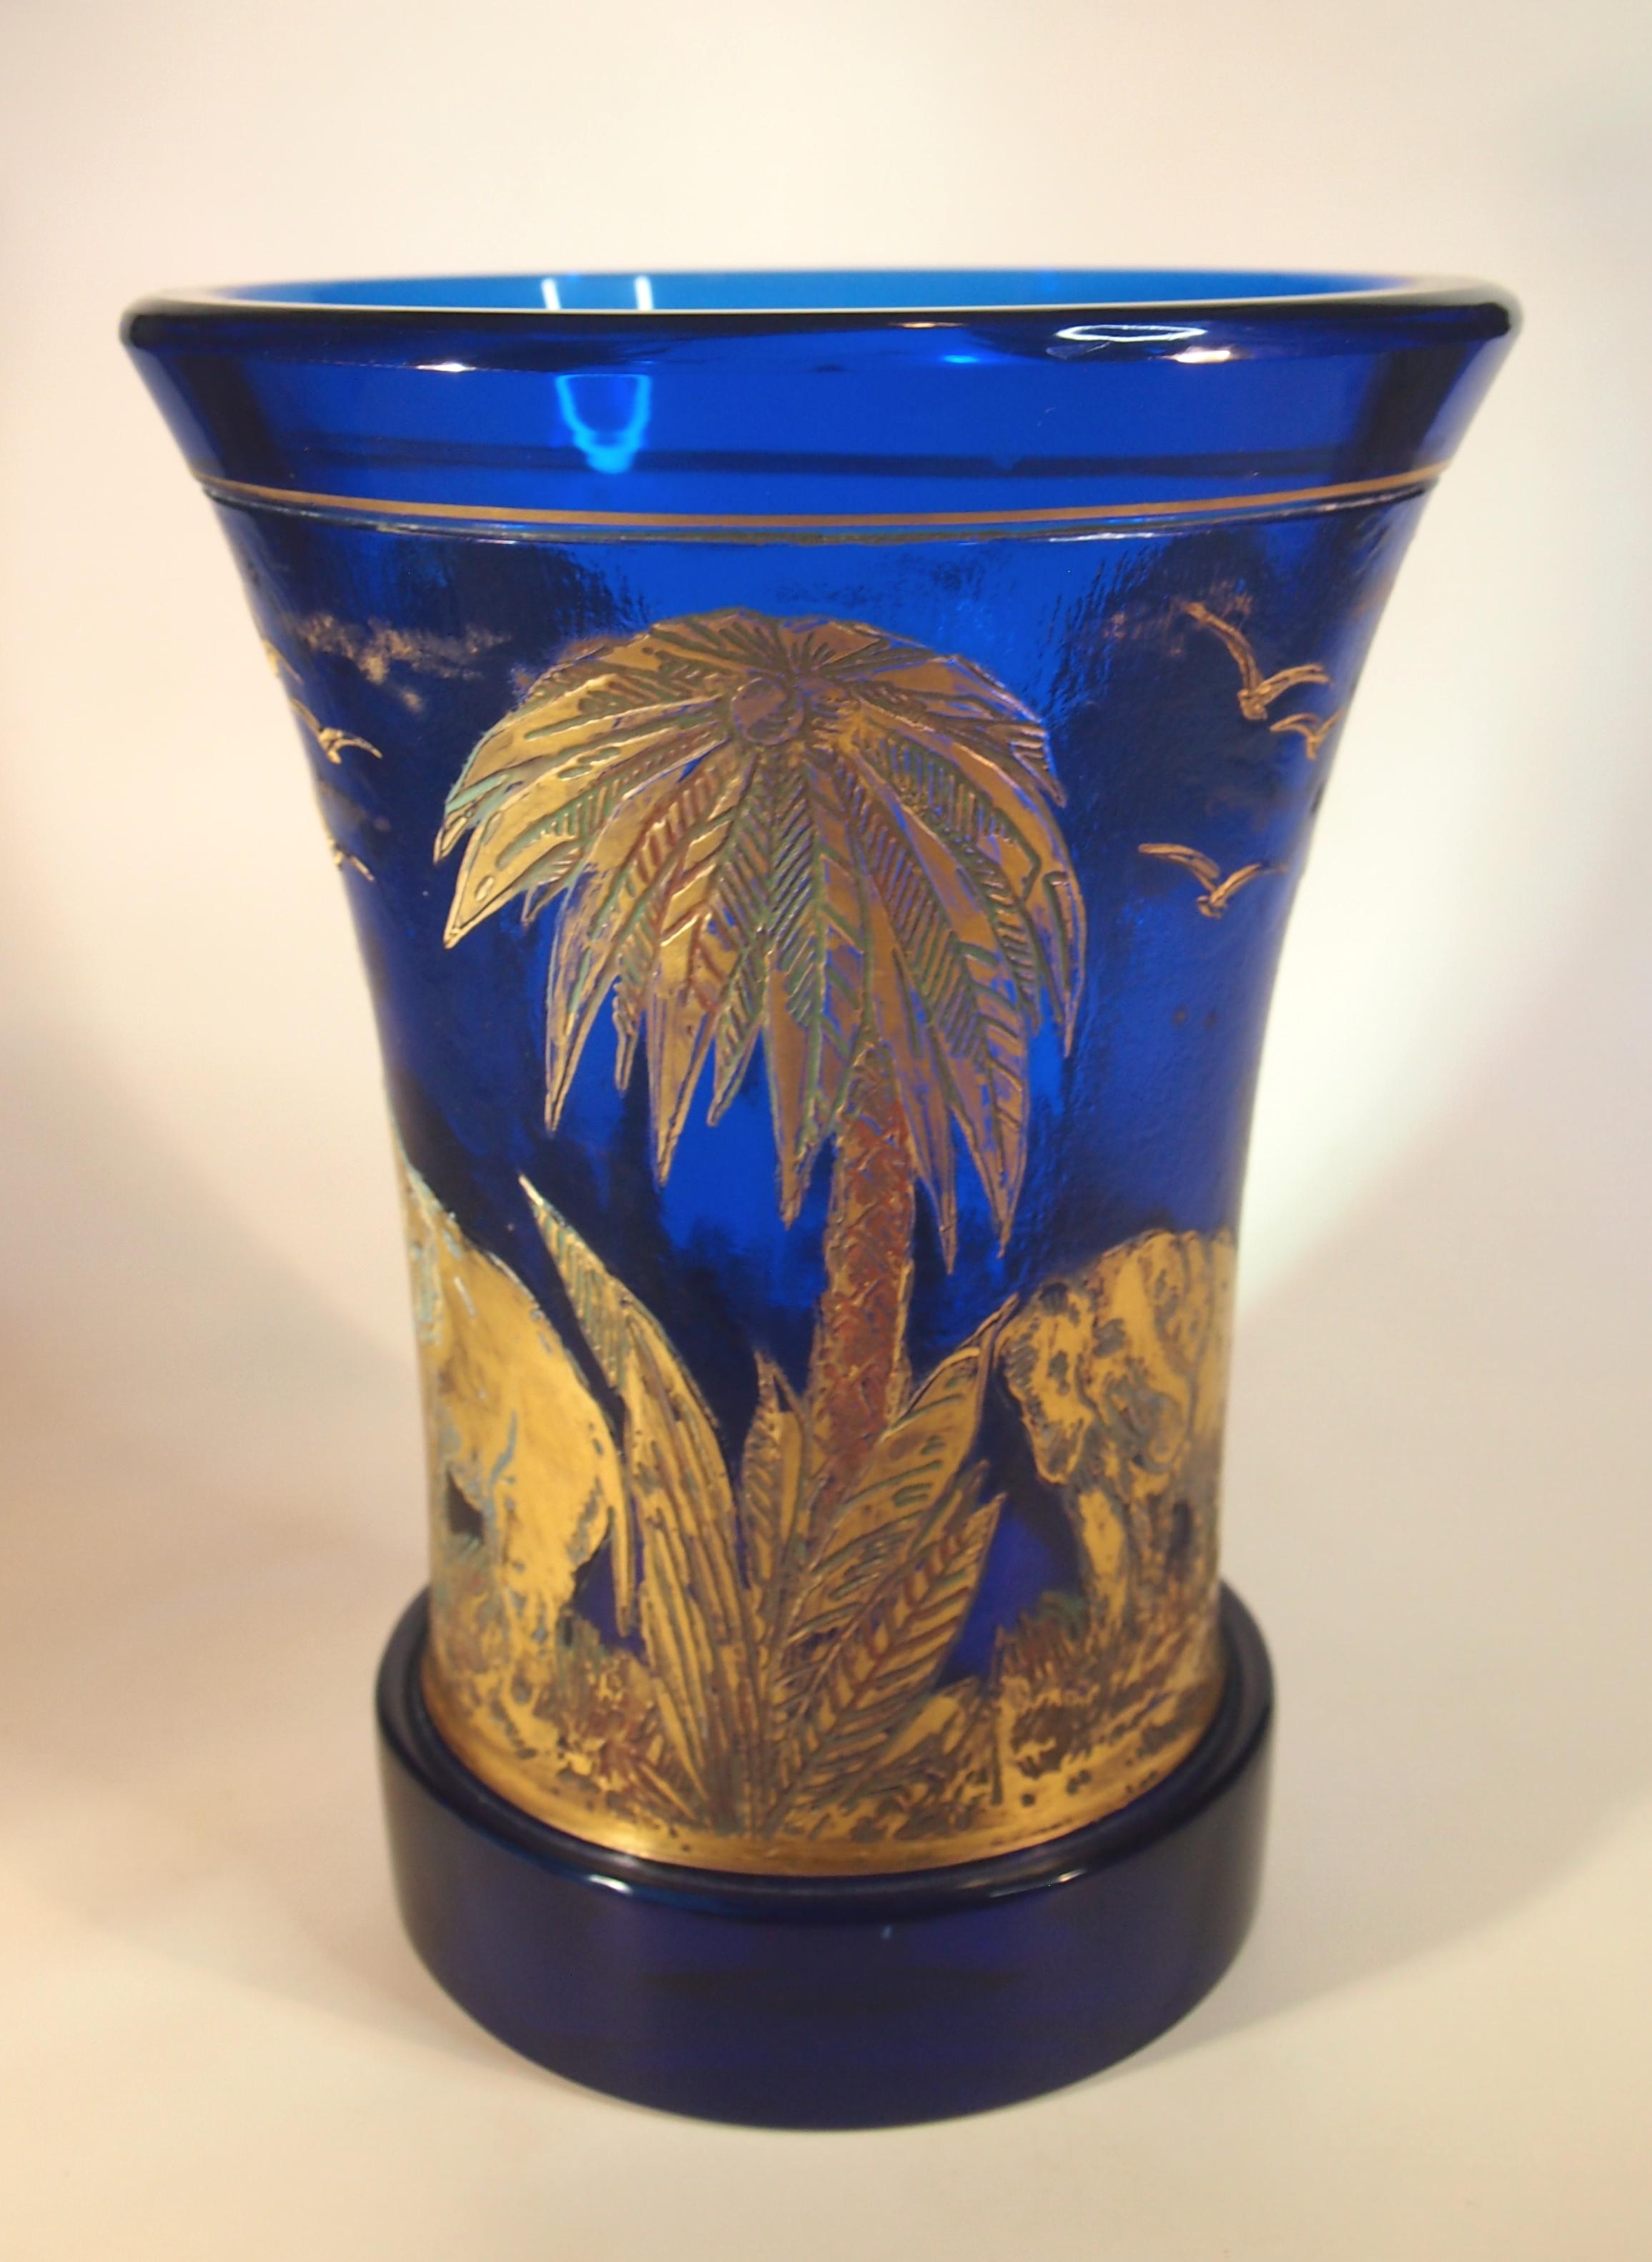 Impressive Art Deco (twice) signed Moser cobalt blue Vase decorated in the rare 'Animor' pattern -this is rare version of Oroplastic glass depicting Jungle scenes in this case: Elephants it was designed by Rudolf Wels -signed faintly Moser on the